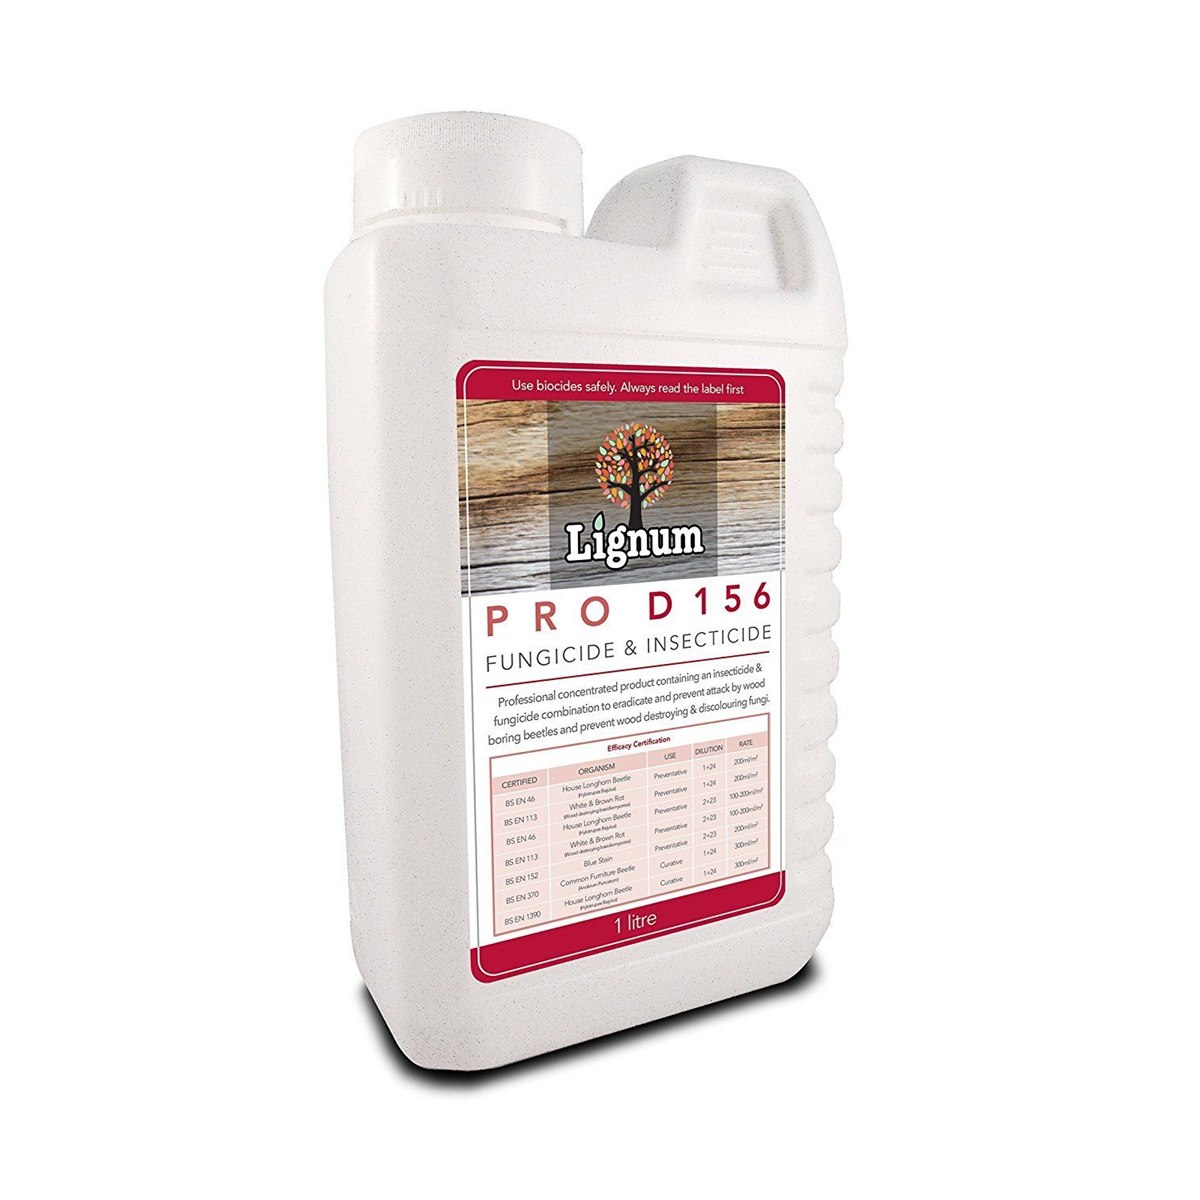 Lignum Pro D156 Professional Concentrated Fungicide And Insecticide 1 Litre